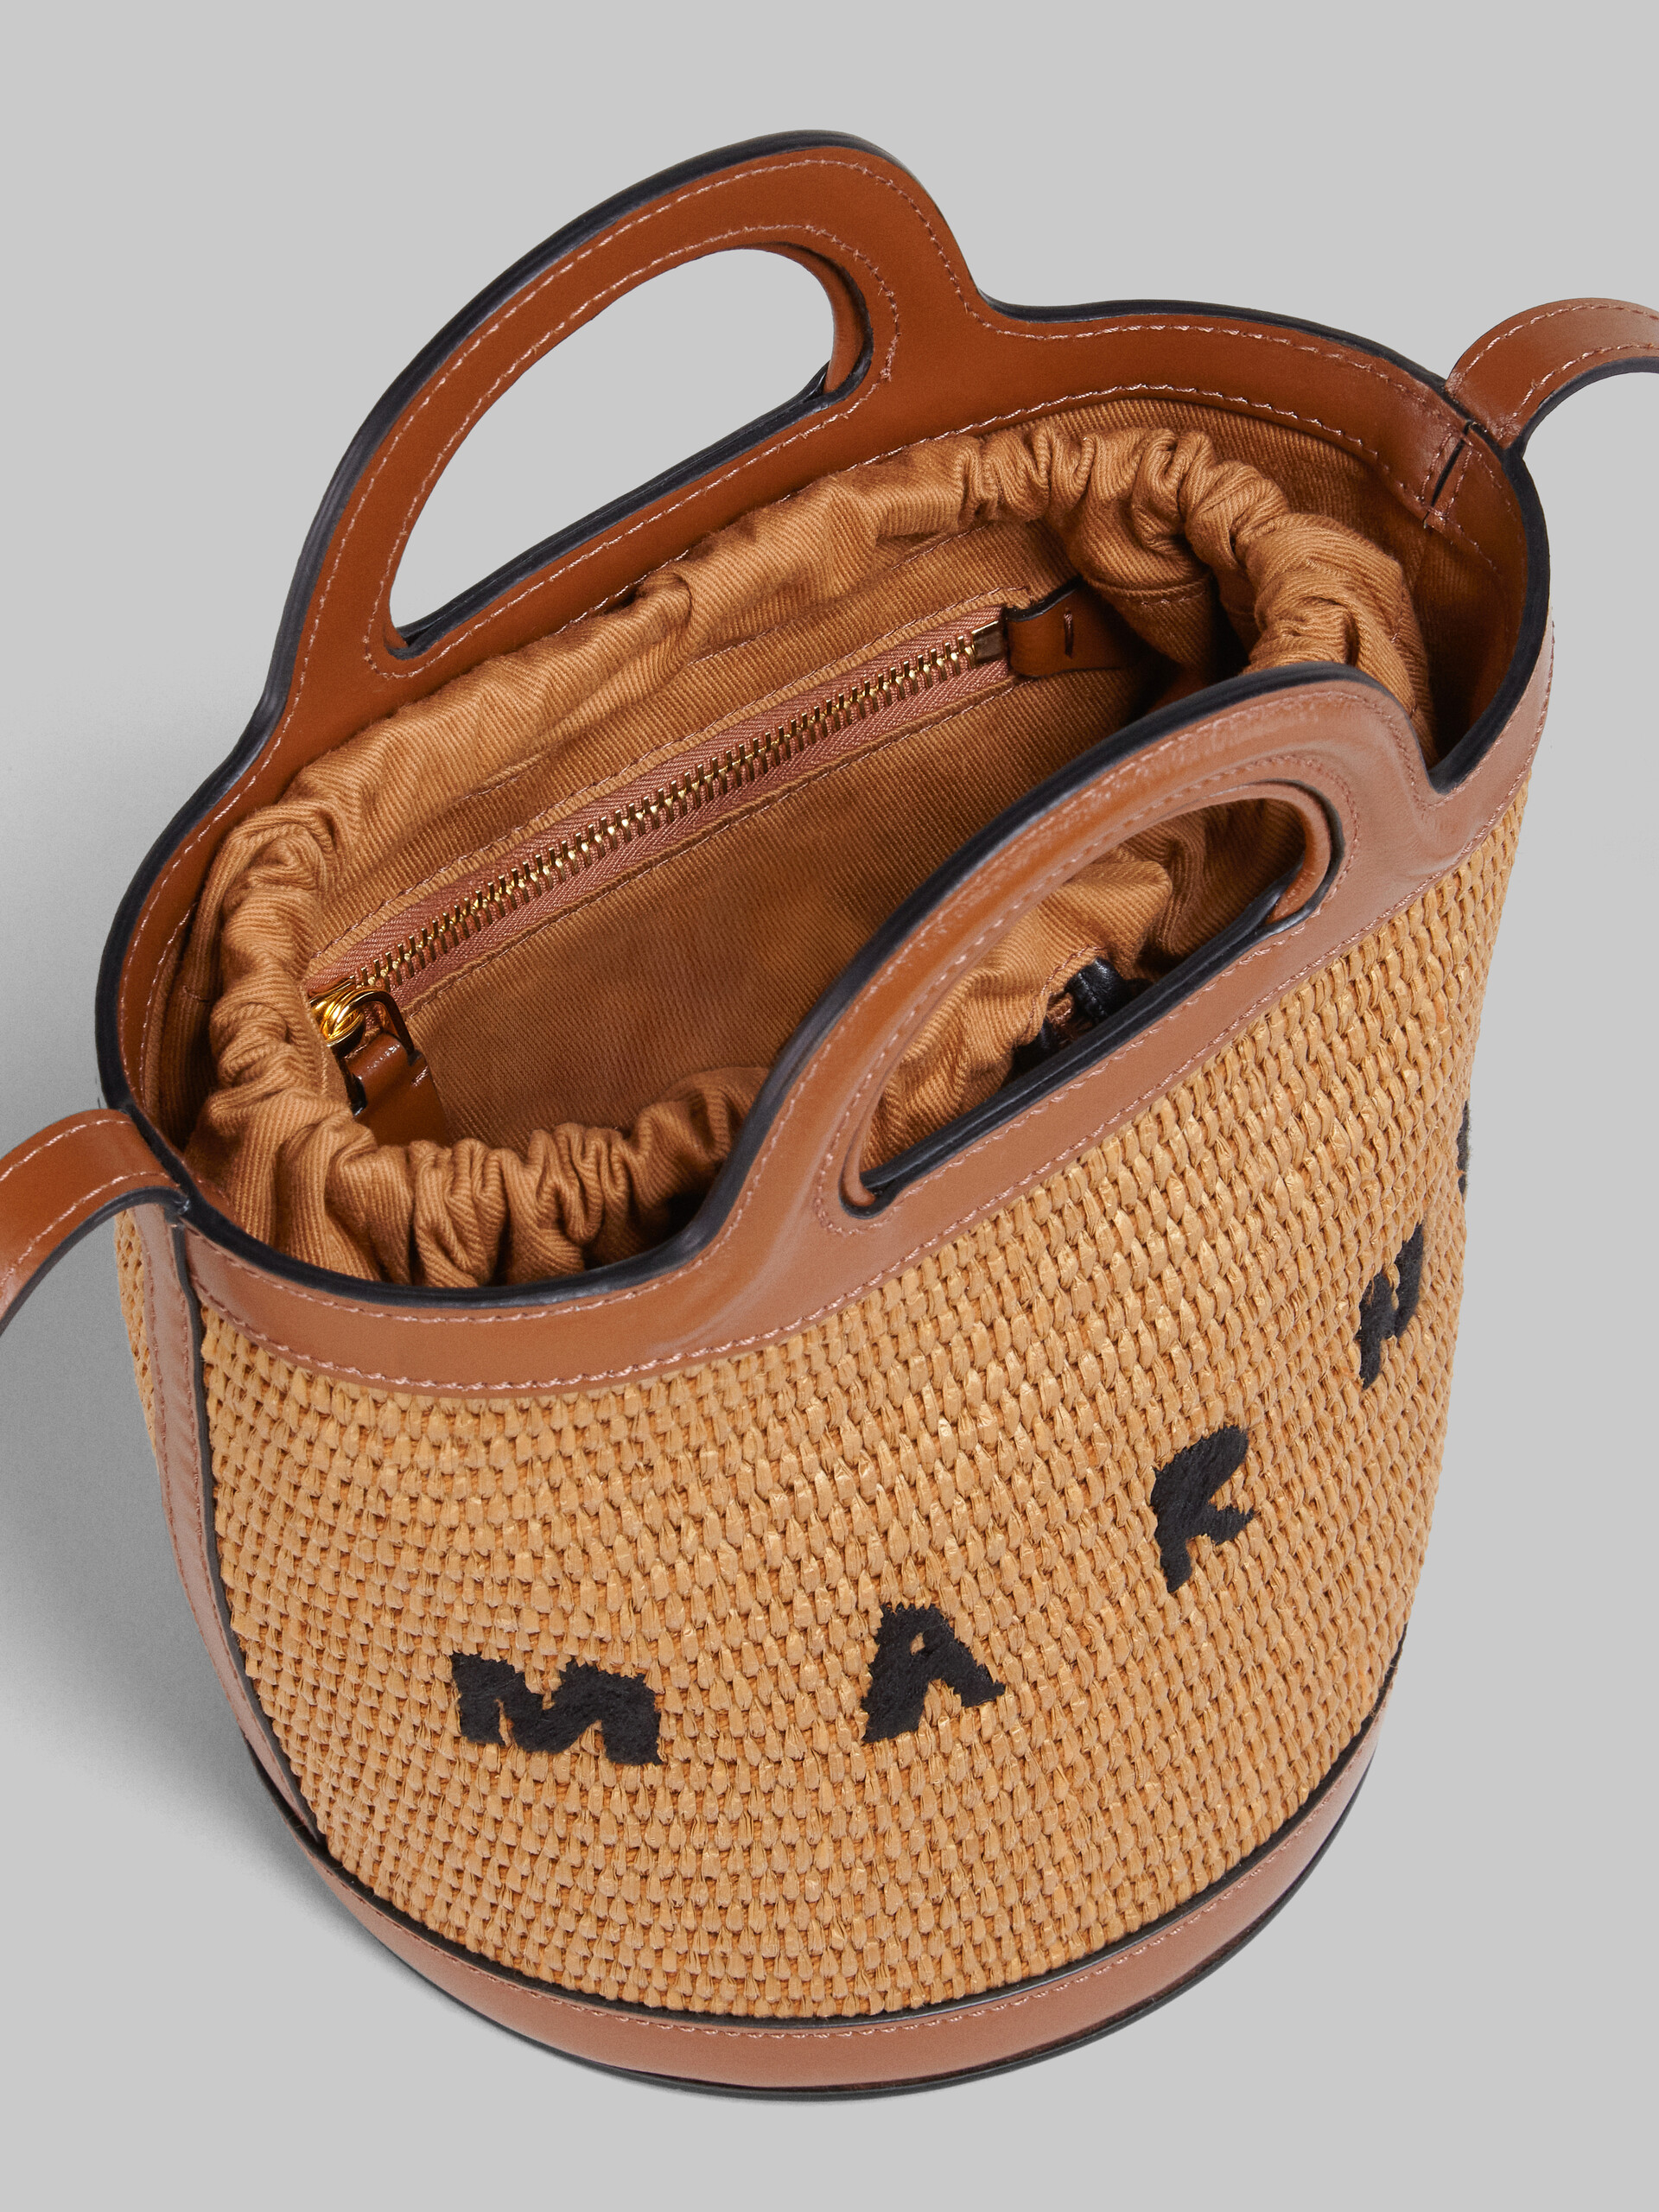 Tropicalia Small Bucket Bag in brown leather and raffia - Shoulder Bag - Image 5